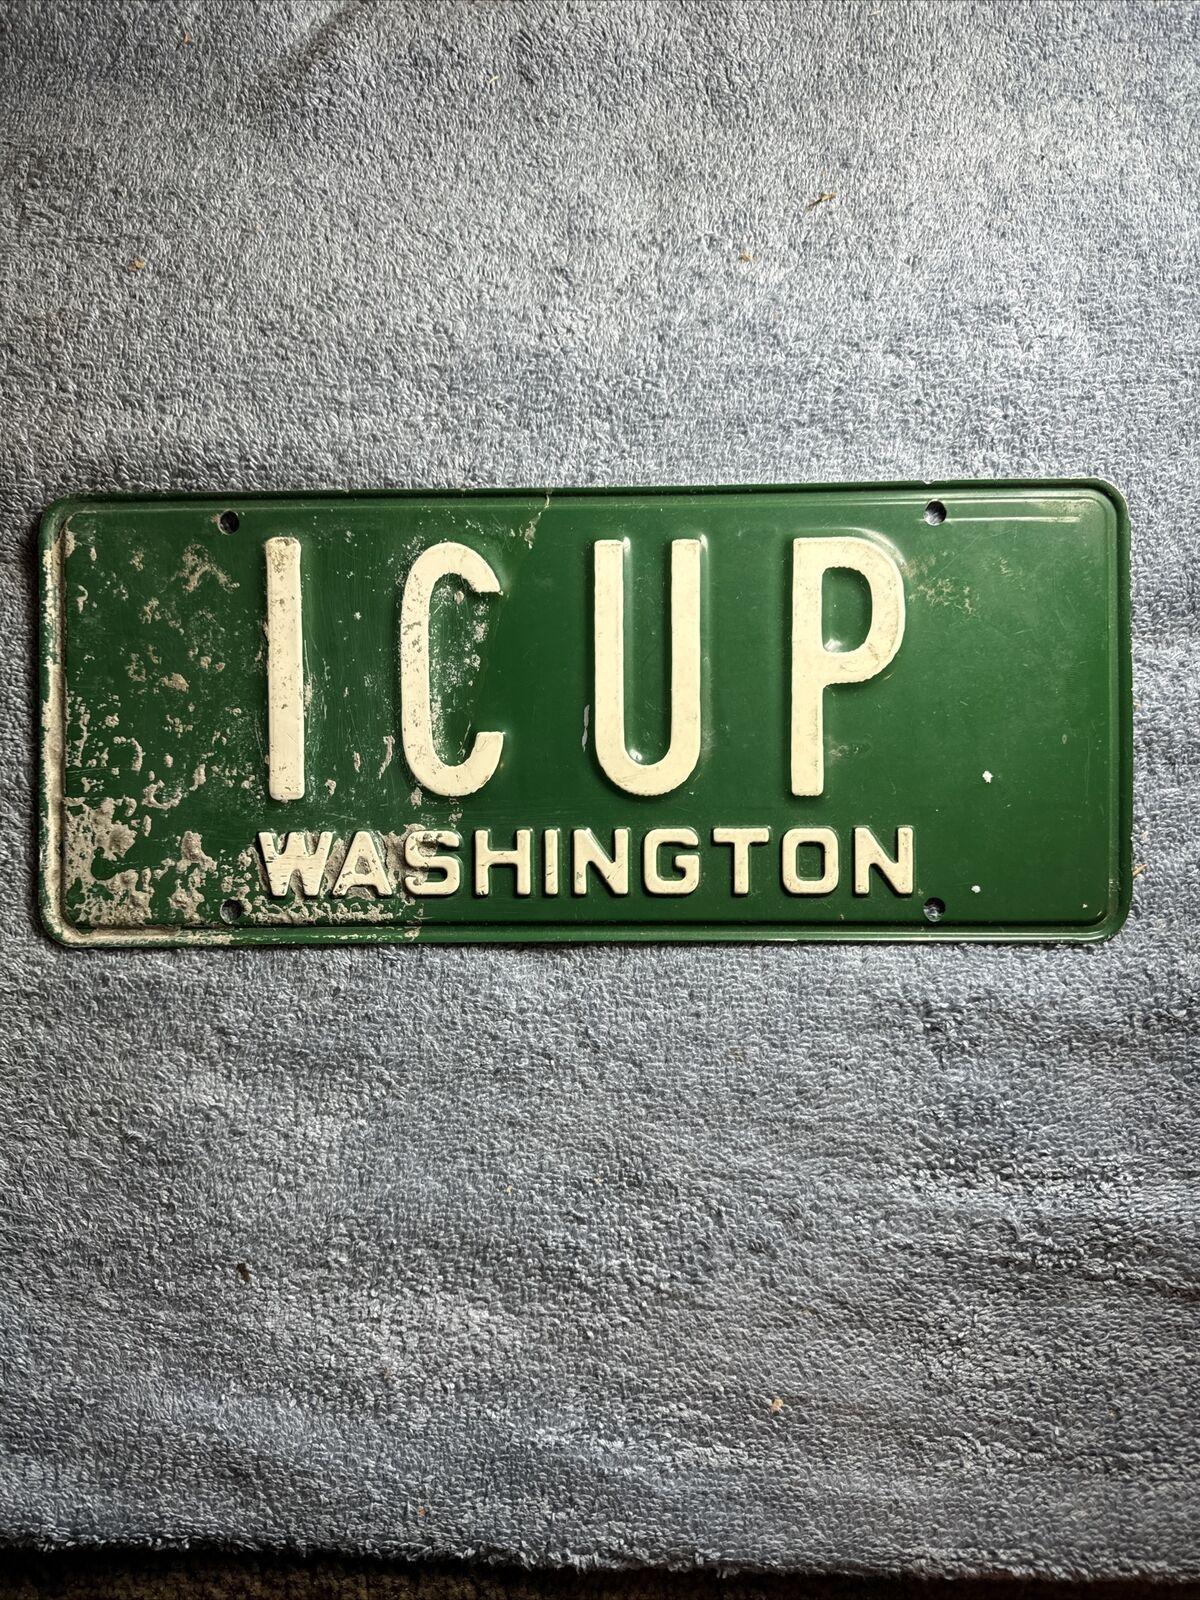 1954 Washington Prison Made Vanity License Plate. ICUP I See You Pee